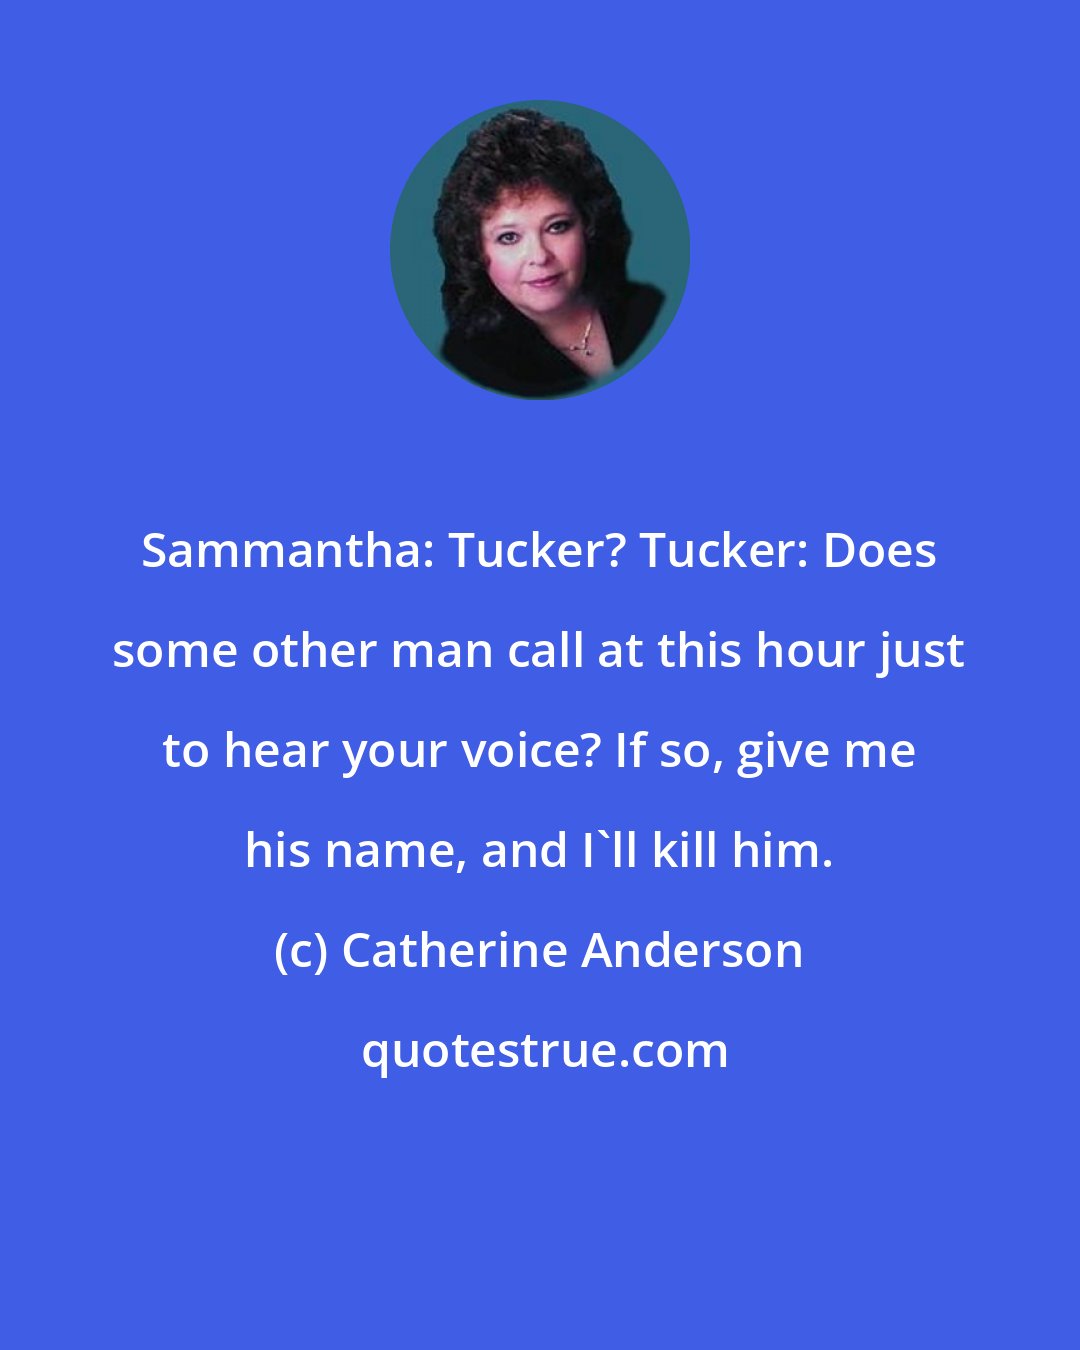 Catherine Anderson: Sammantha: Tucker? Tucker: Does some other man call at this hour just to hear your voice? If so, give me his name, and I'll kill him.